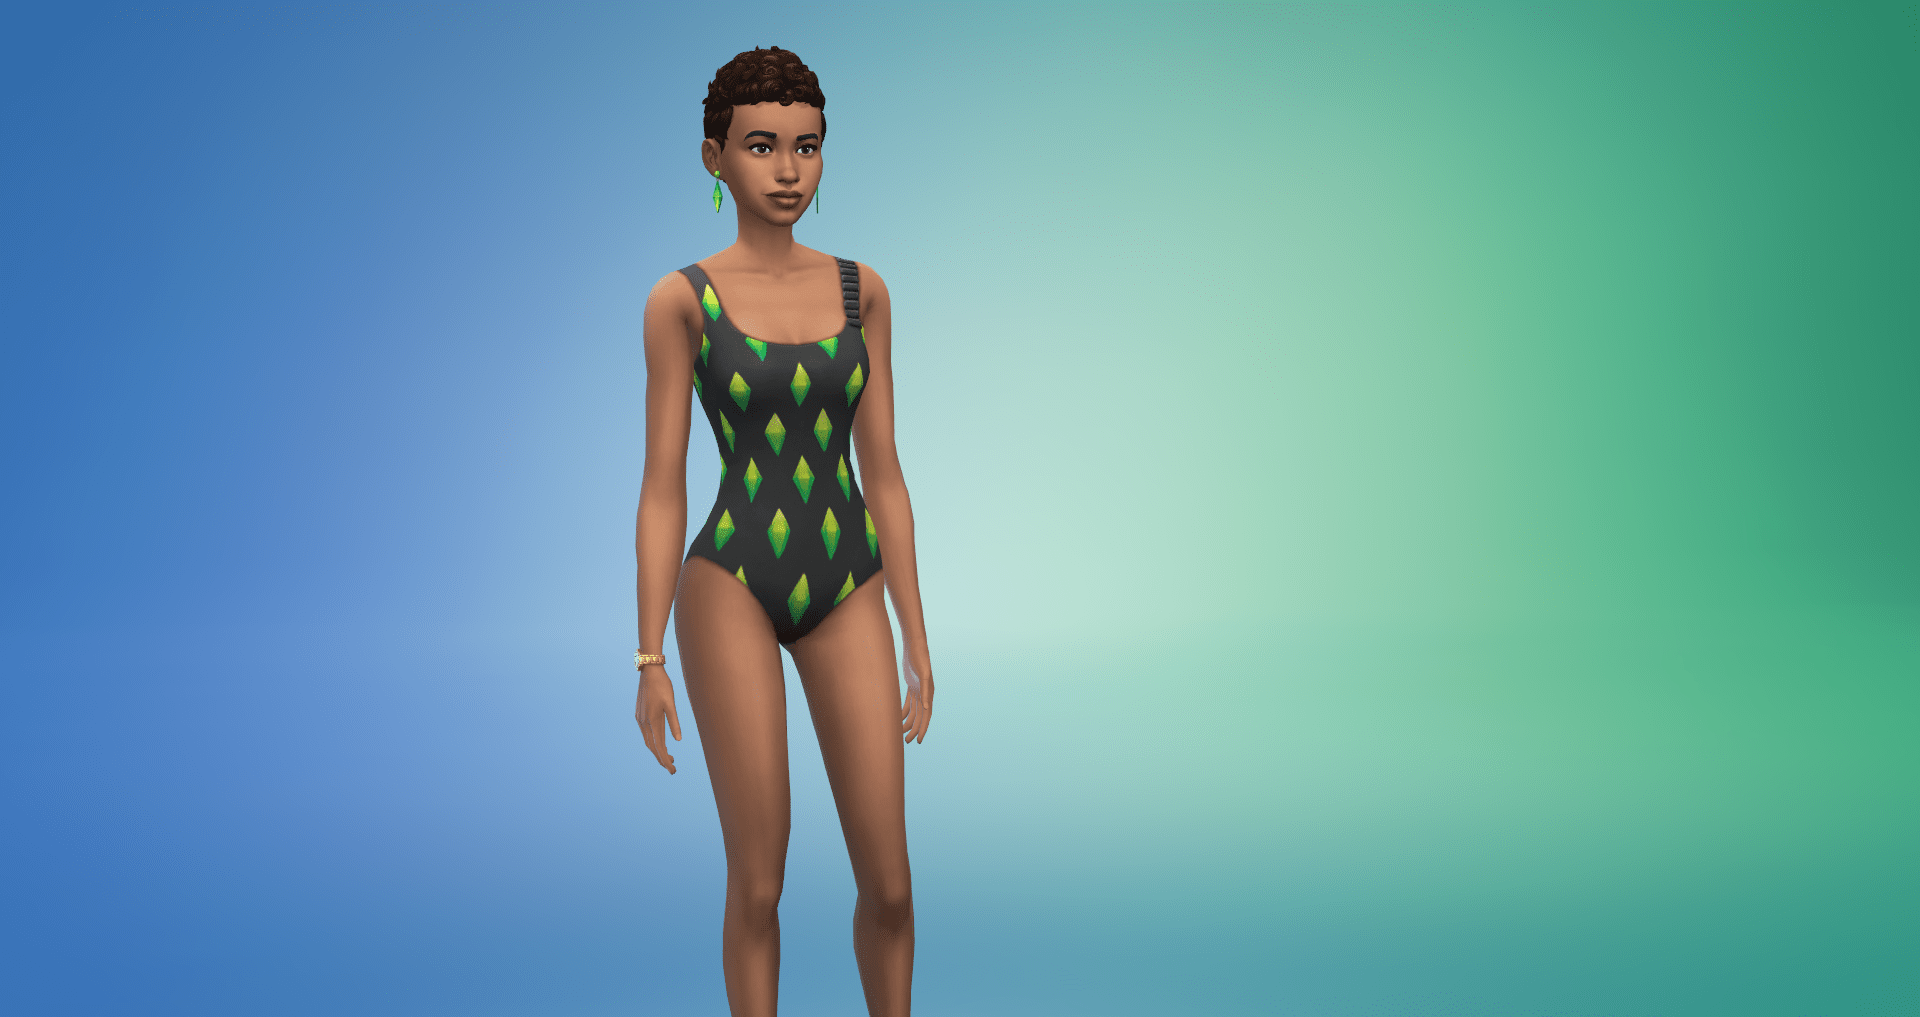 The Sims 4 Moschino Stuff Pack Announced for PC, Mac and Consoles -  BeyondSims